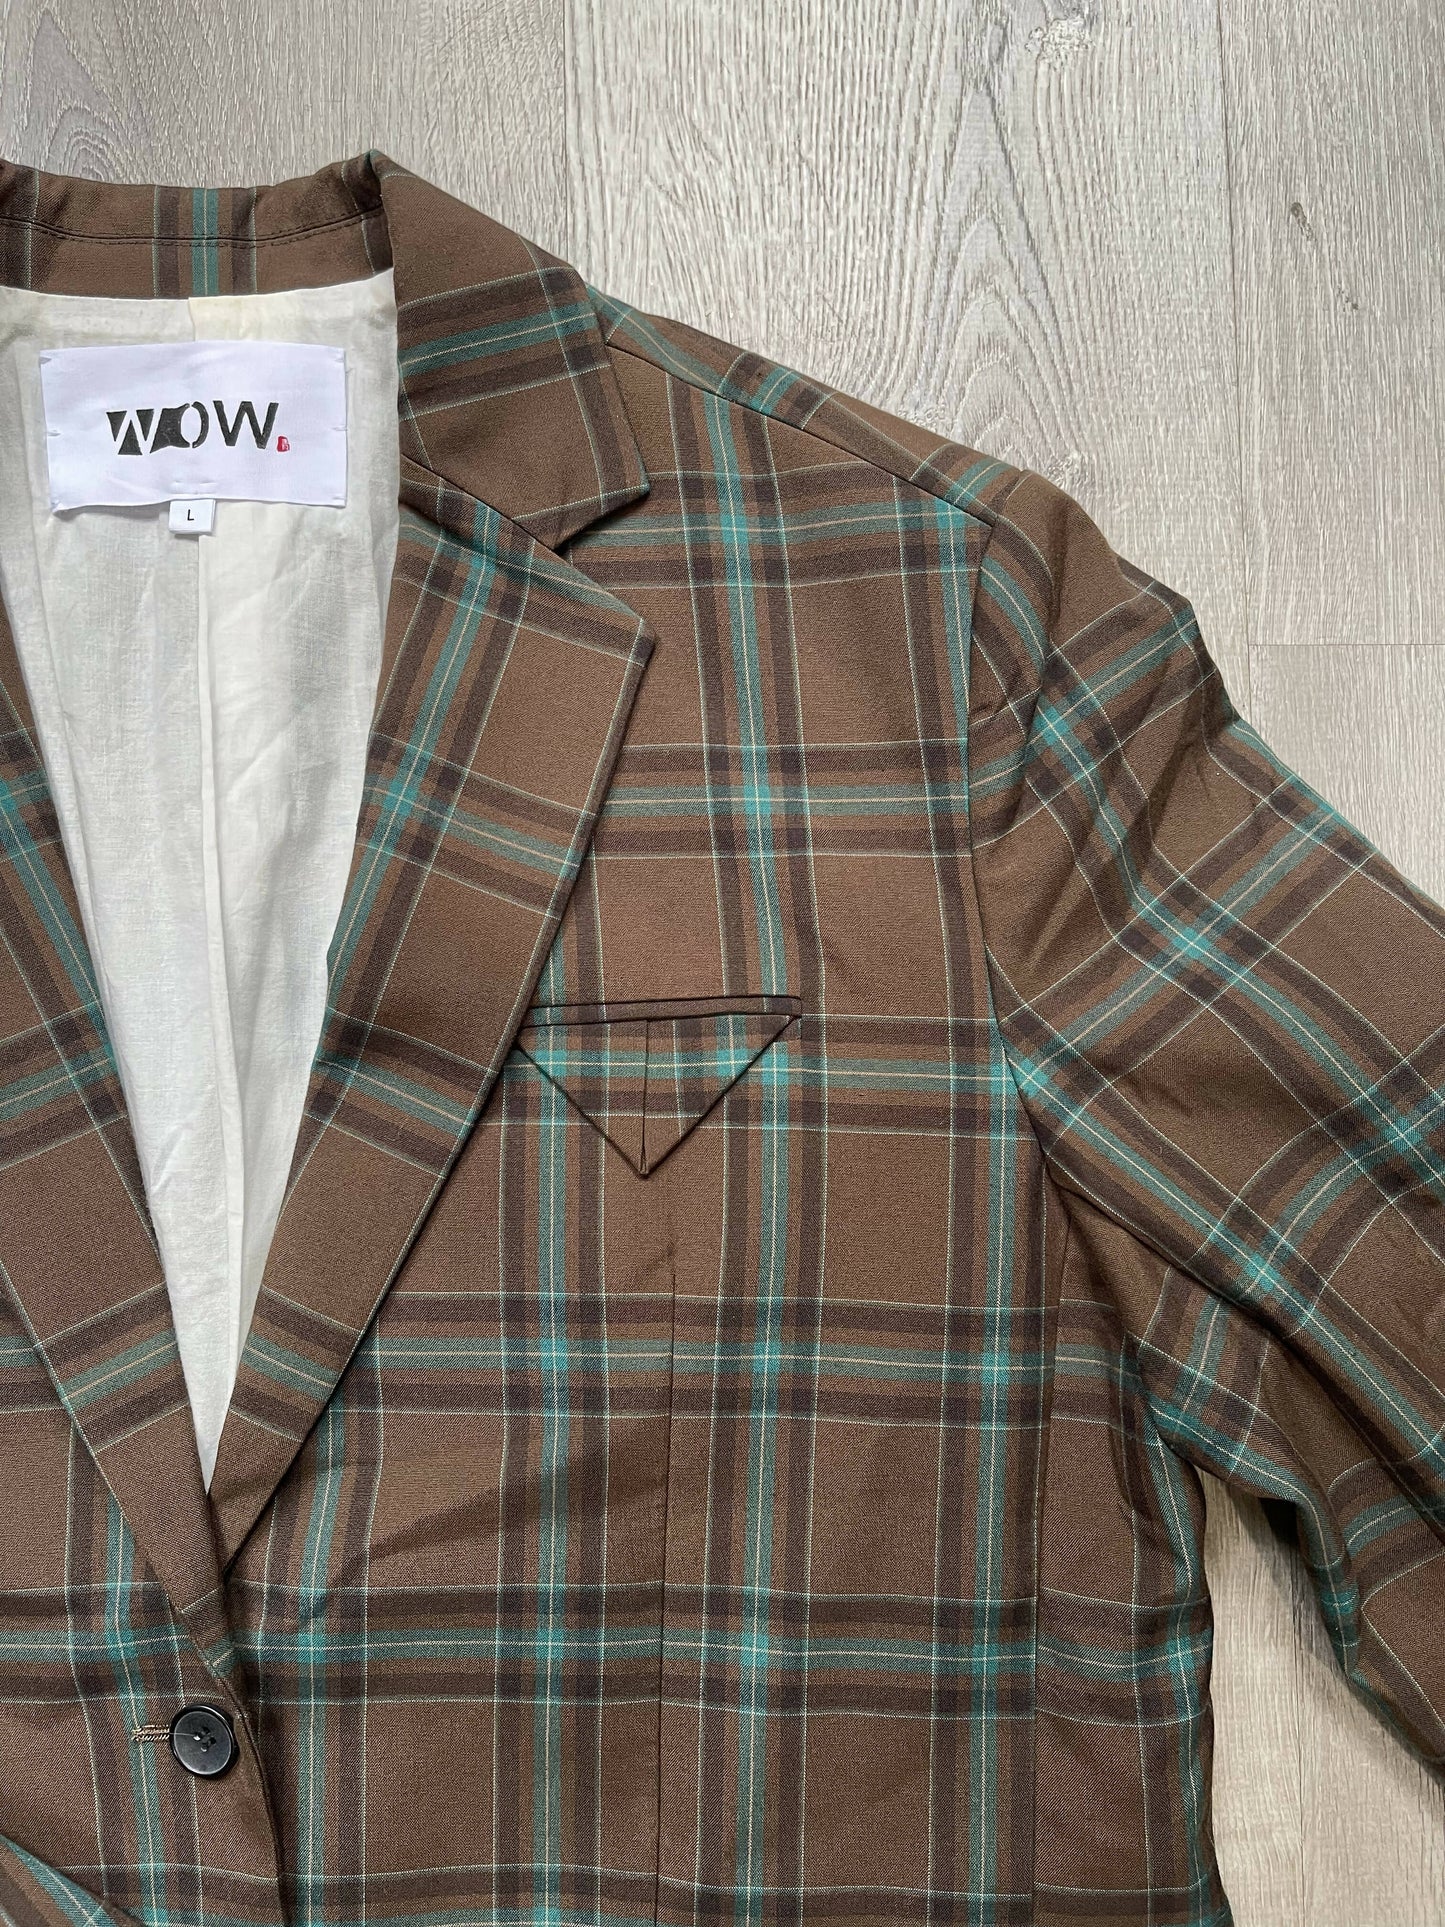 Retro Elegance: Blue and Brown Checked Suit Jacket